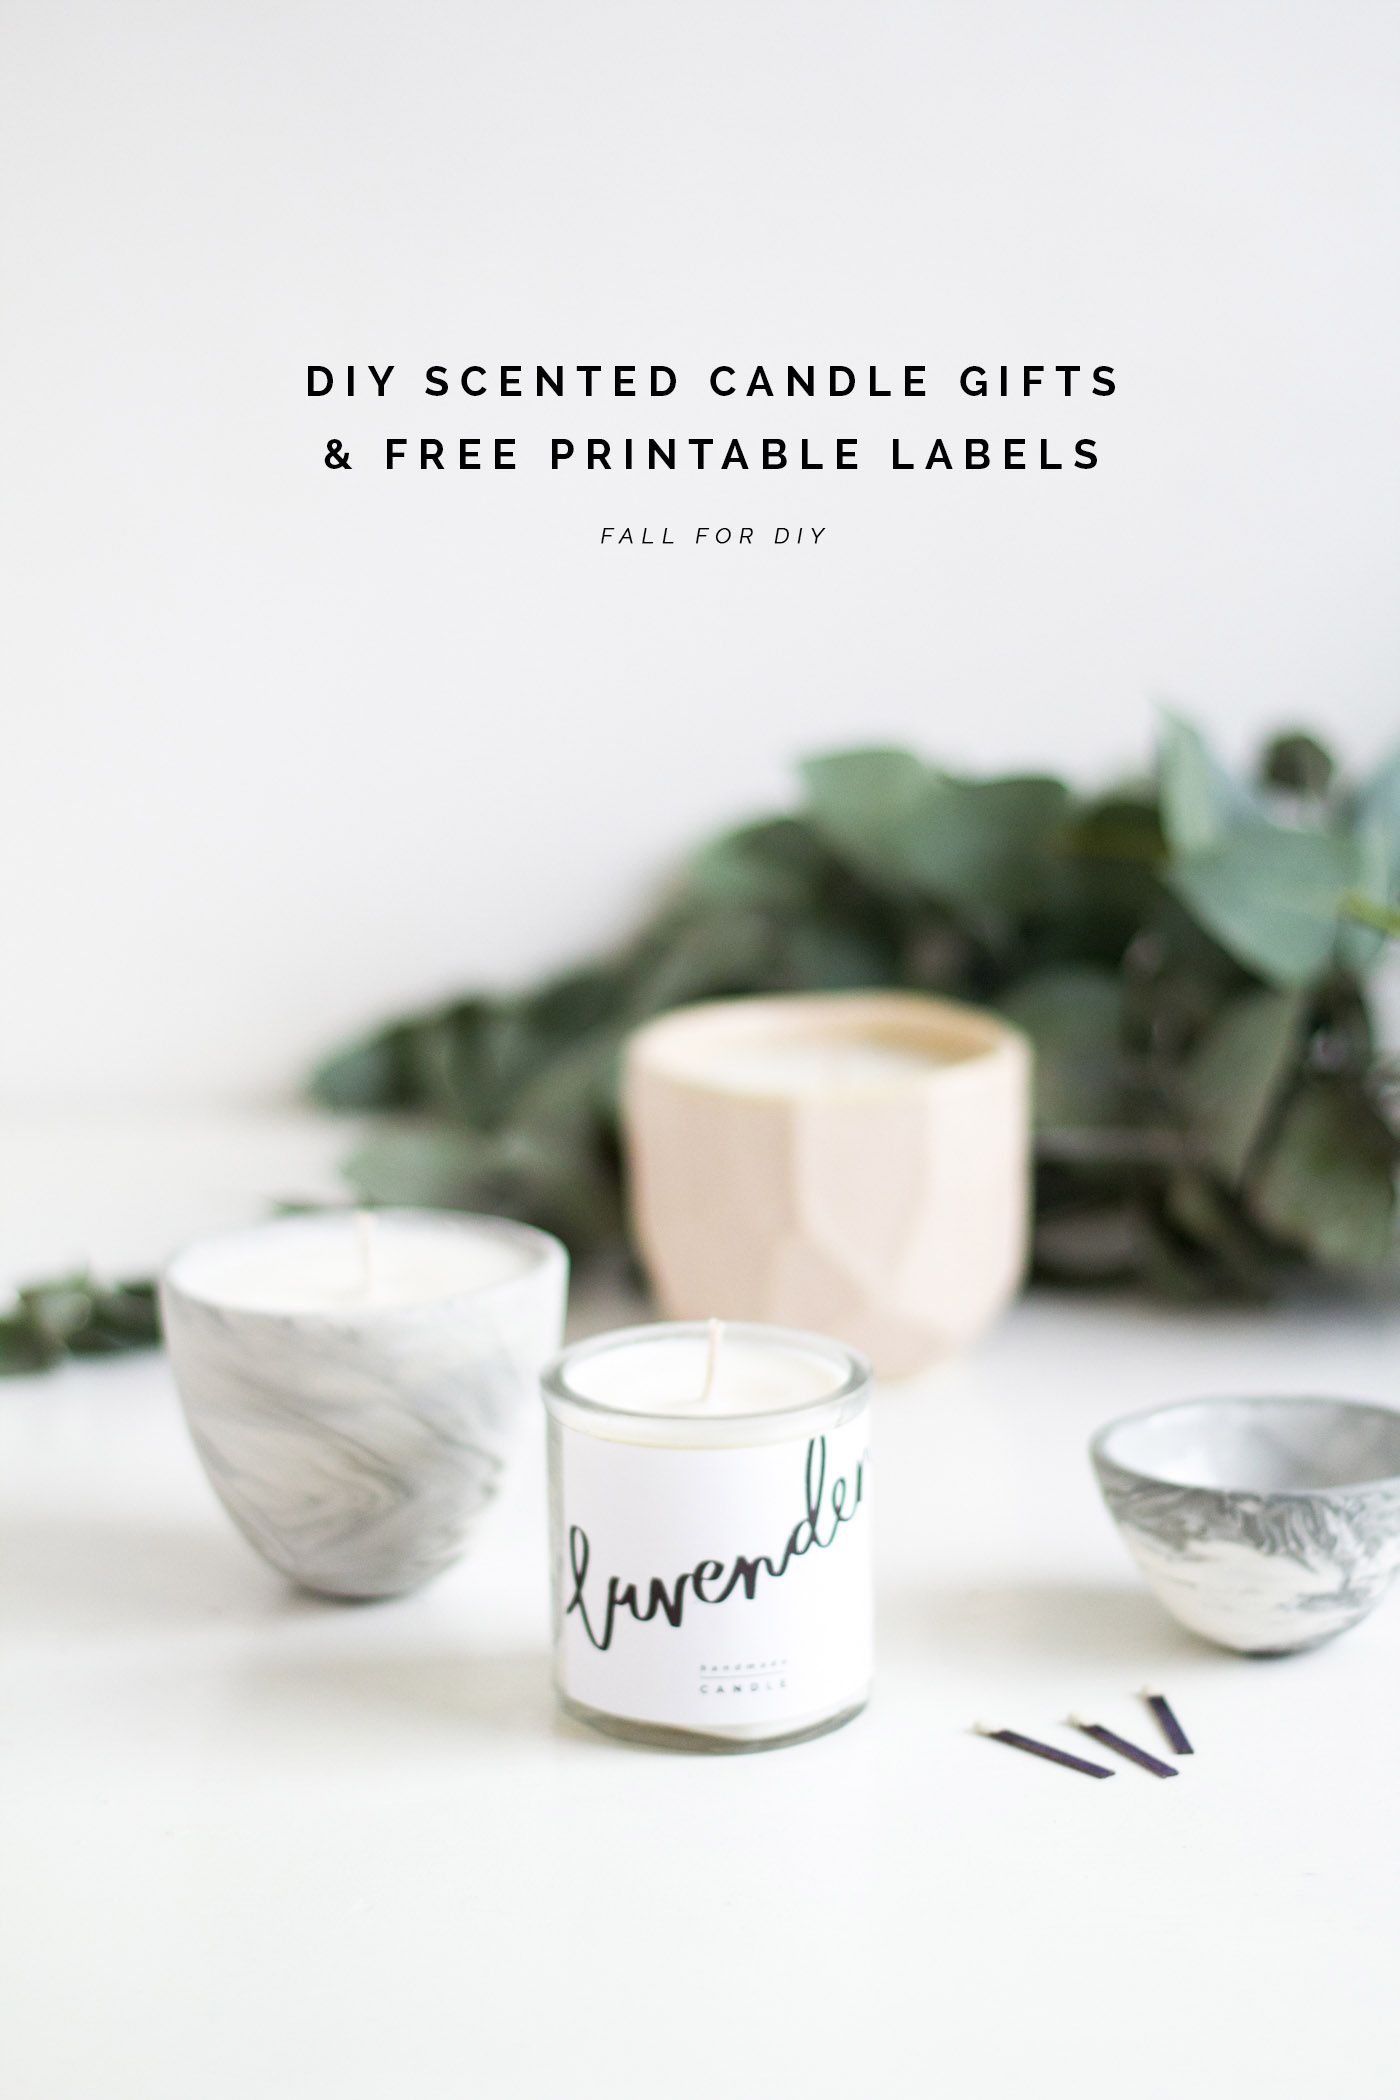 DIY Scented Candle Gifts & Free Printable labels | @fallfordiy